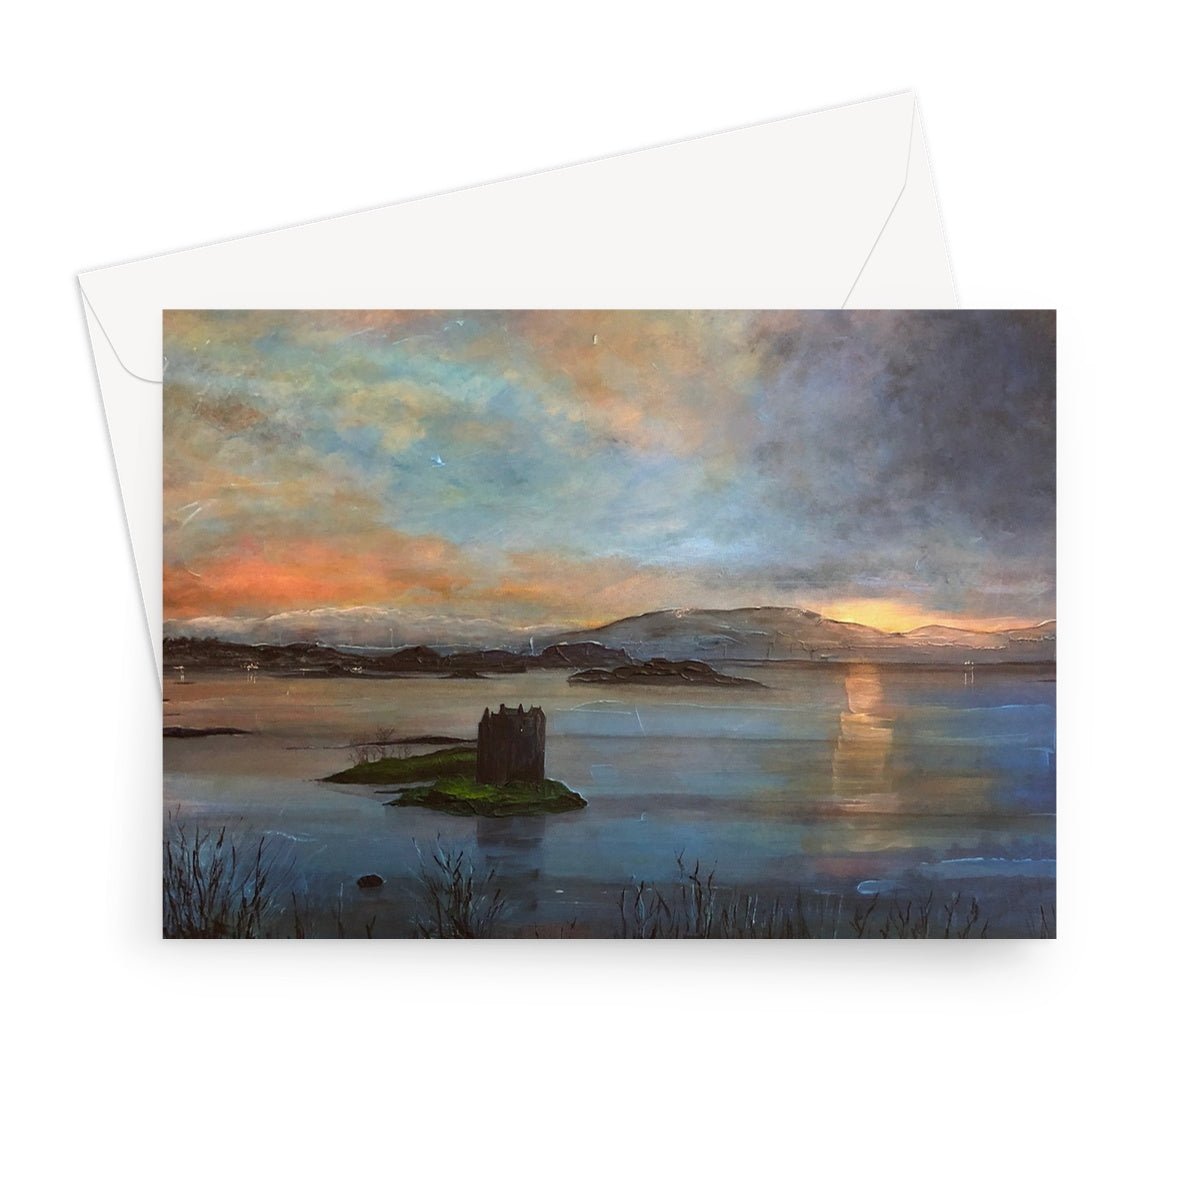 Castle Stalker Twilight Art Gifts Greeting Card-Greetings Cards-Scottish Castles Art Gallery-7"x5"-10 Cards-Paintings, Prints, Homeware, Art Gifts From Scotland By Scottish Artist Kevin Hunter